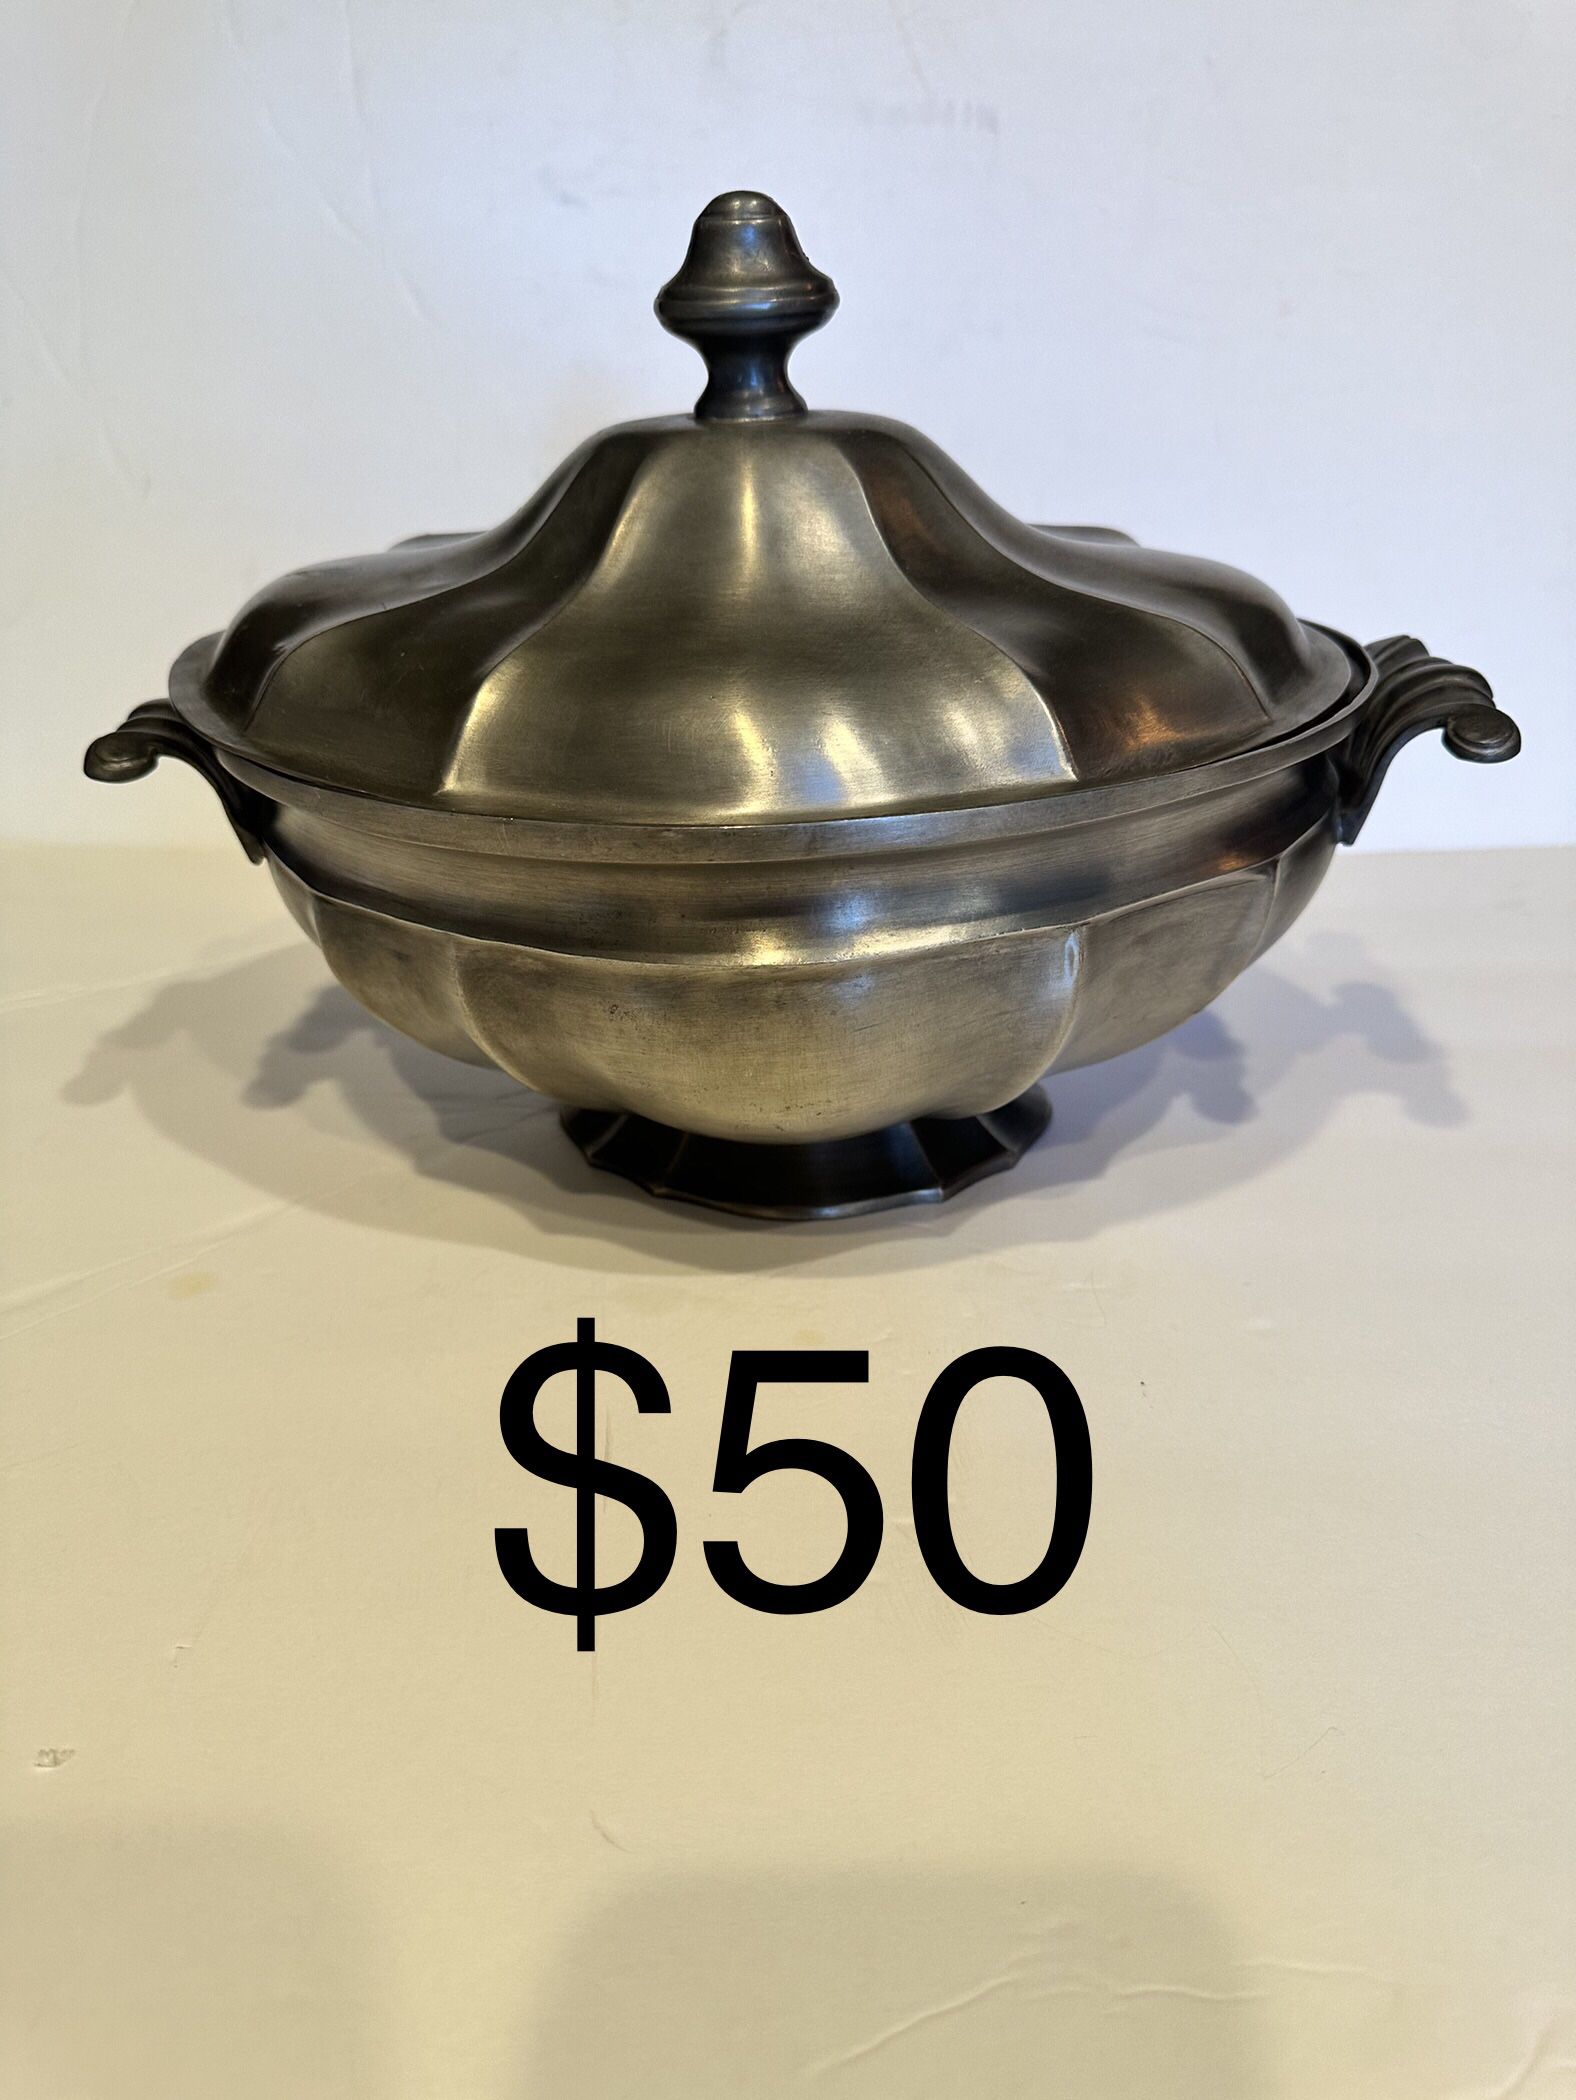 Antique Italian pewter tureen. Only $50.